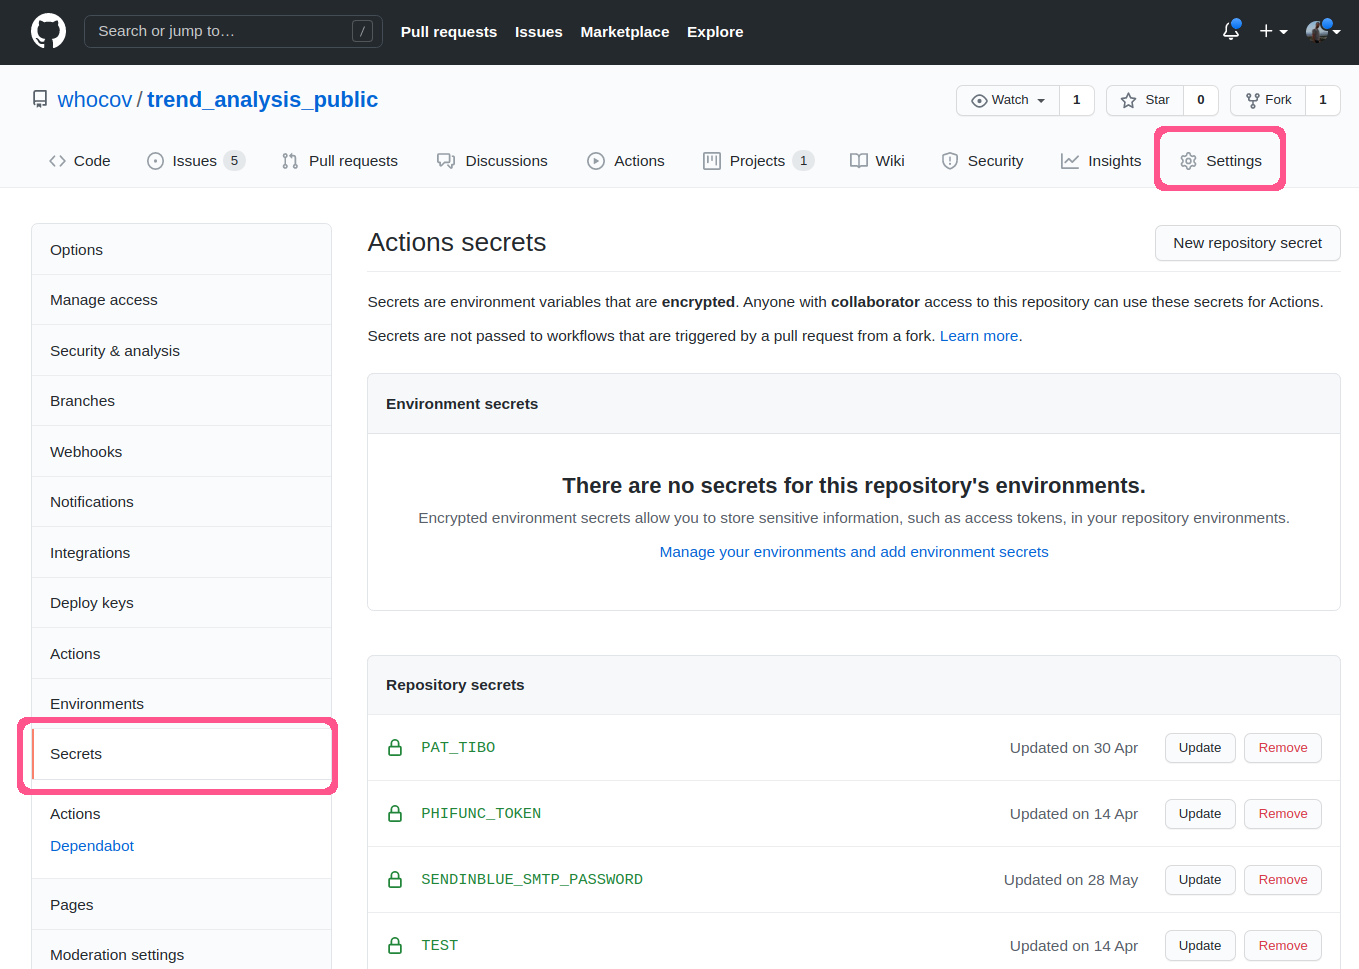 Github secret page. This screenshot shows the location of github secrets on the infrastructure's page, underthe *Settings* tab. New secrets can be added there, and old secrets can be modified, but not visualised.